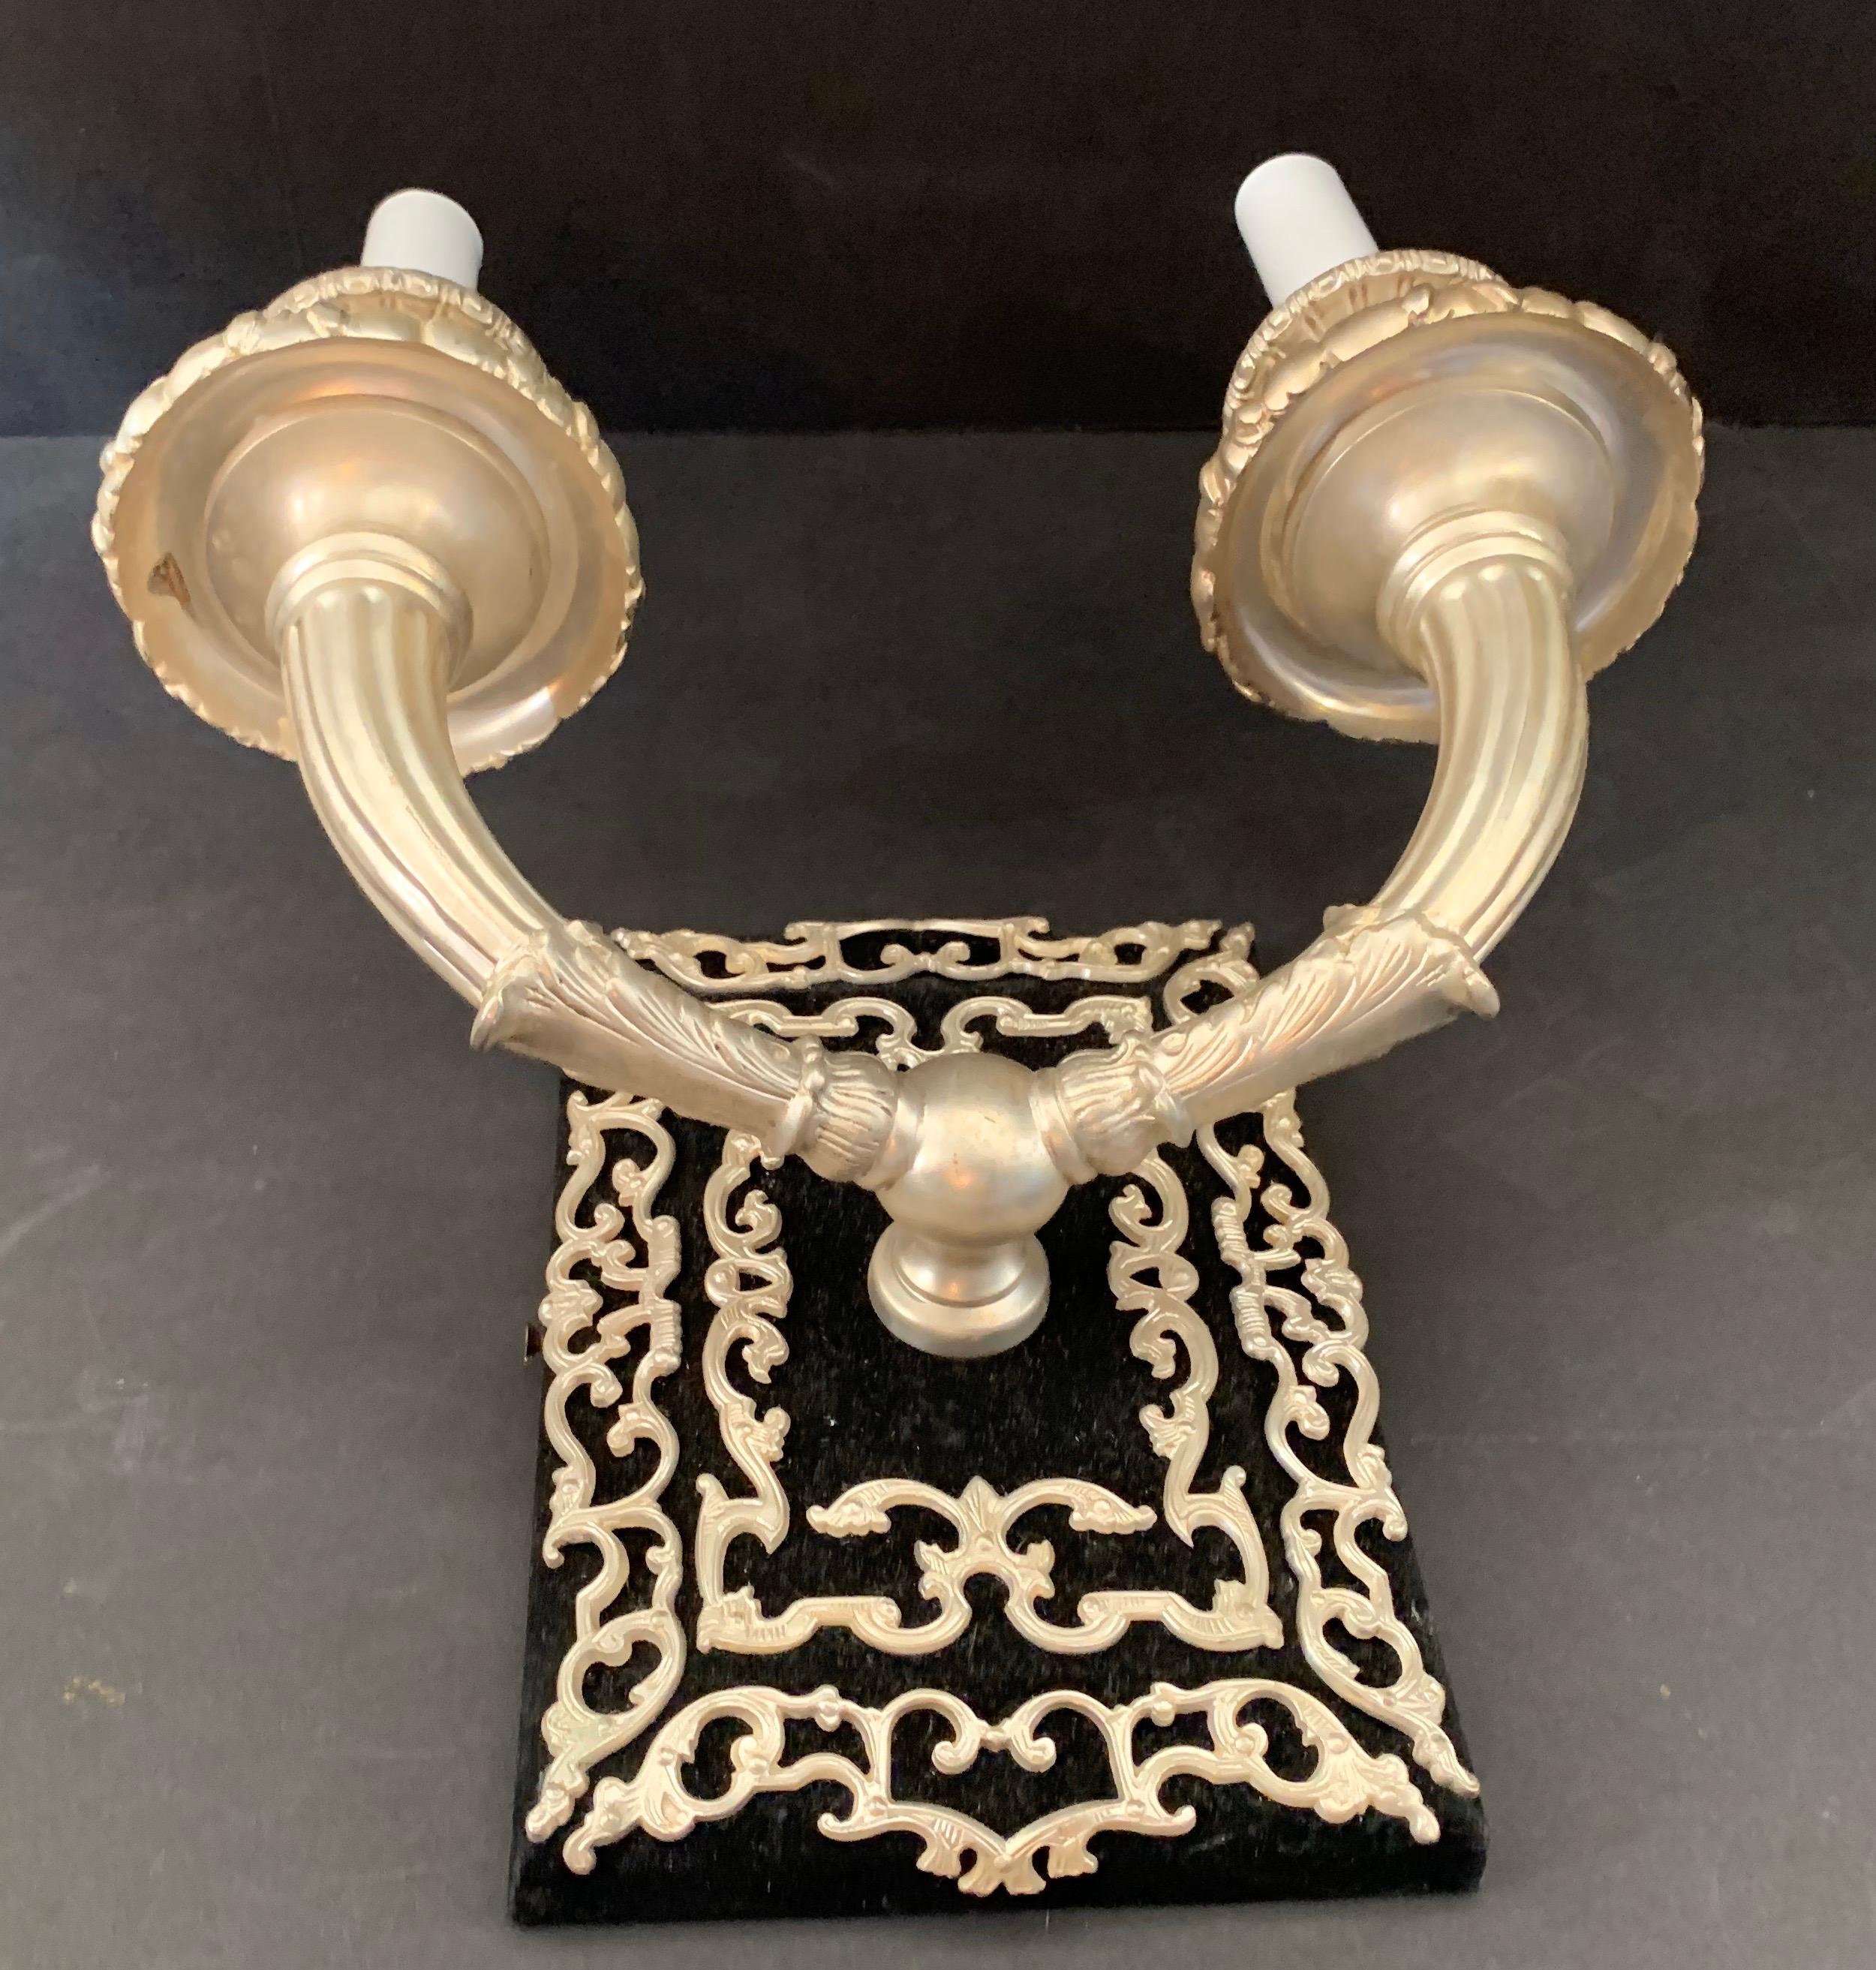 20th Century Wonderful French Empire Neoclassical Silvered Bronze Ormolu Caldwell 3 Sconces For Sale